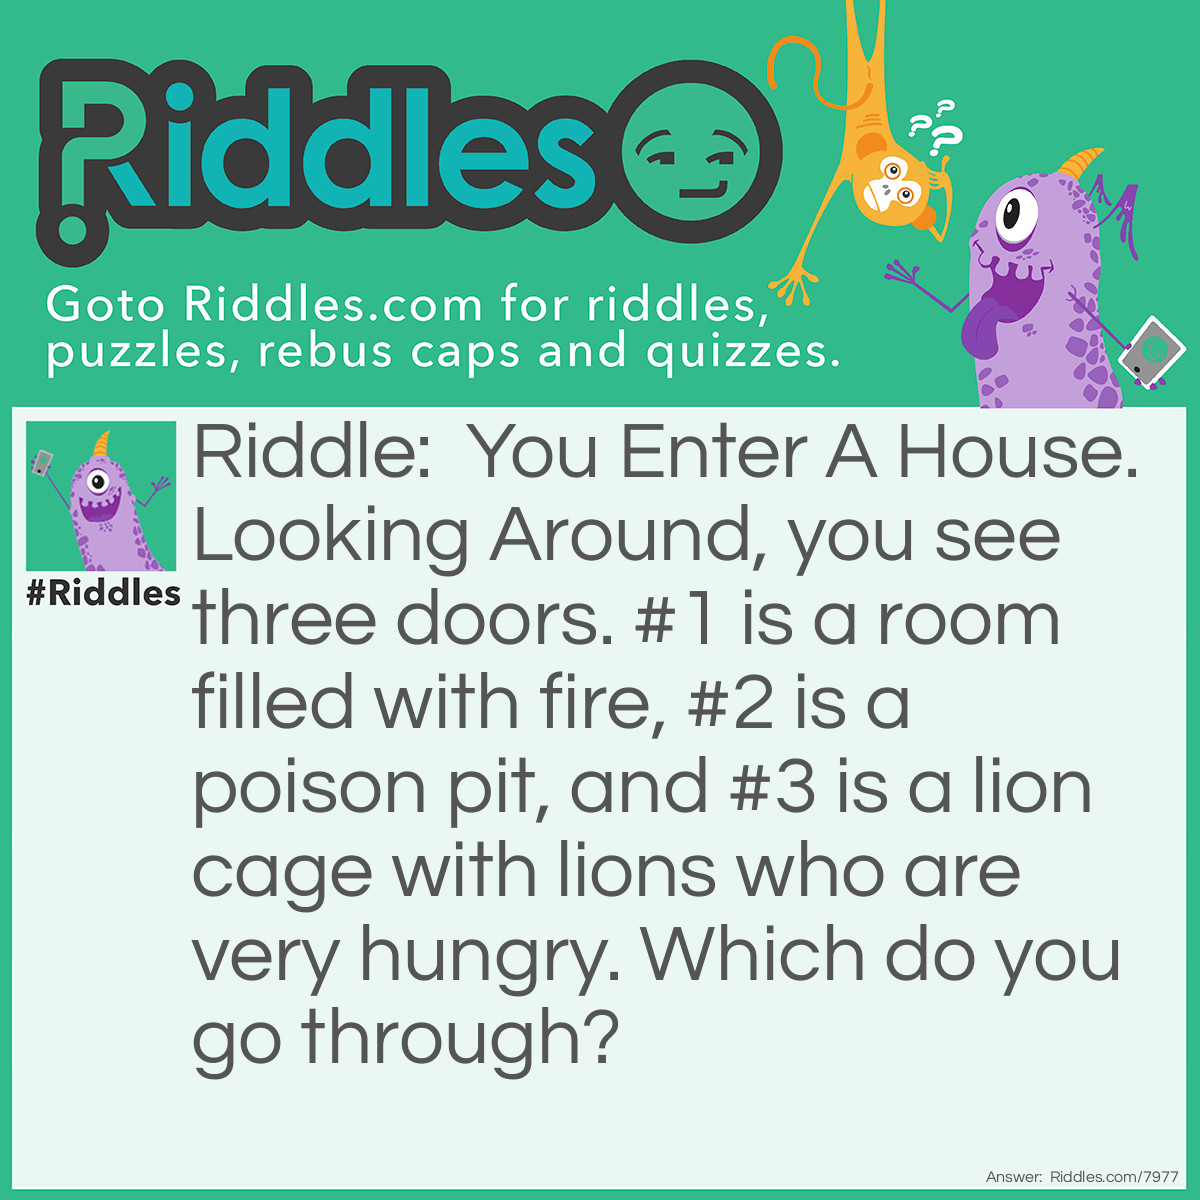 Riddle: You Enter A House. Looking Around, you see three doors. #1 is a room filled with fire, #2 is a poison pit, and #3 is a lion cage with lions who are very hungry. Which do you go through? Answer: The Poison Pit. It Is Empty.